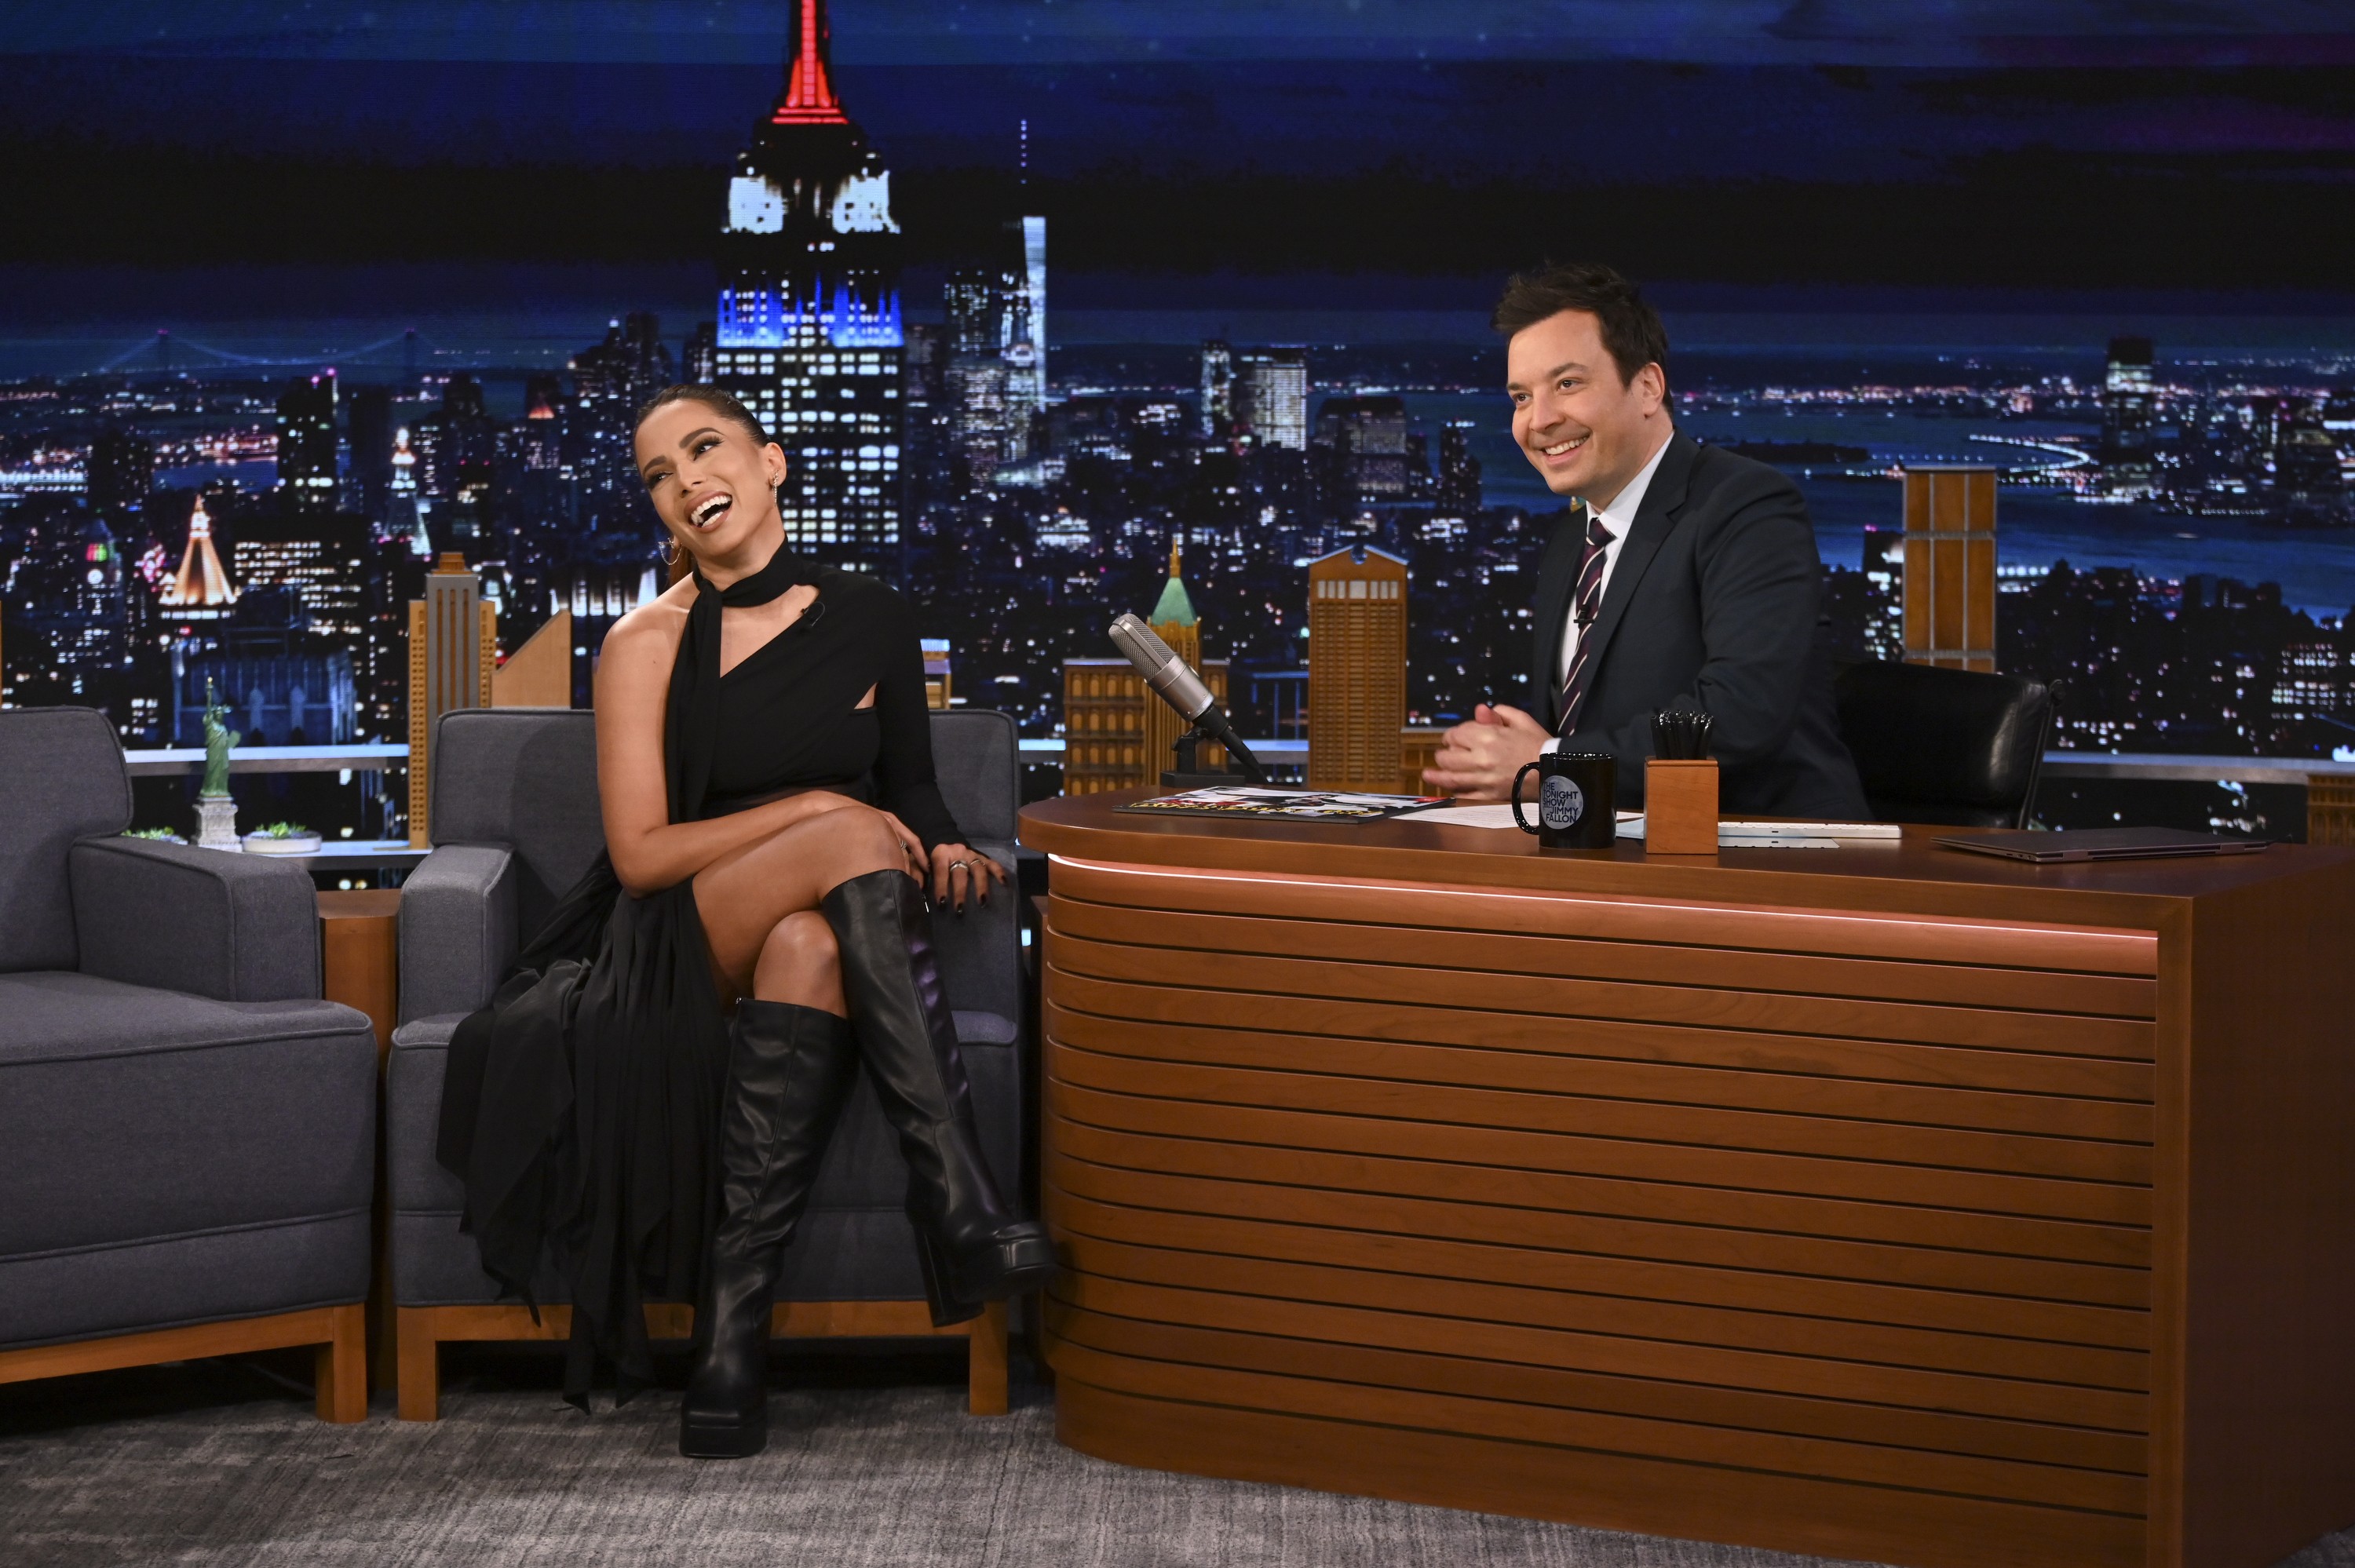 THE TONIGHT SHOW STARRING JIMMY FALLON -- Episode 1595 -- Pictured: (l-r) Singer Anitta during an interview with host Jimmy Fallon on Monday, January 31, 2022 -- (Photo by: Nathan Congleton/NBC/NBCU Photo Bank via Getty Images) (Foto: NBCU Photo Bank via Getty Images)